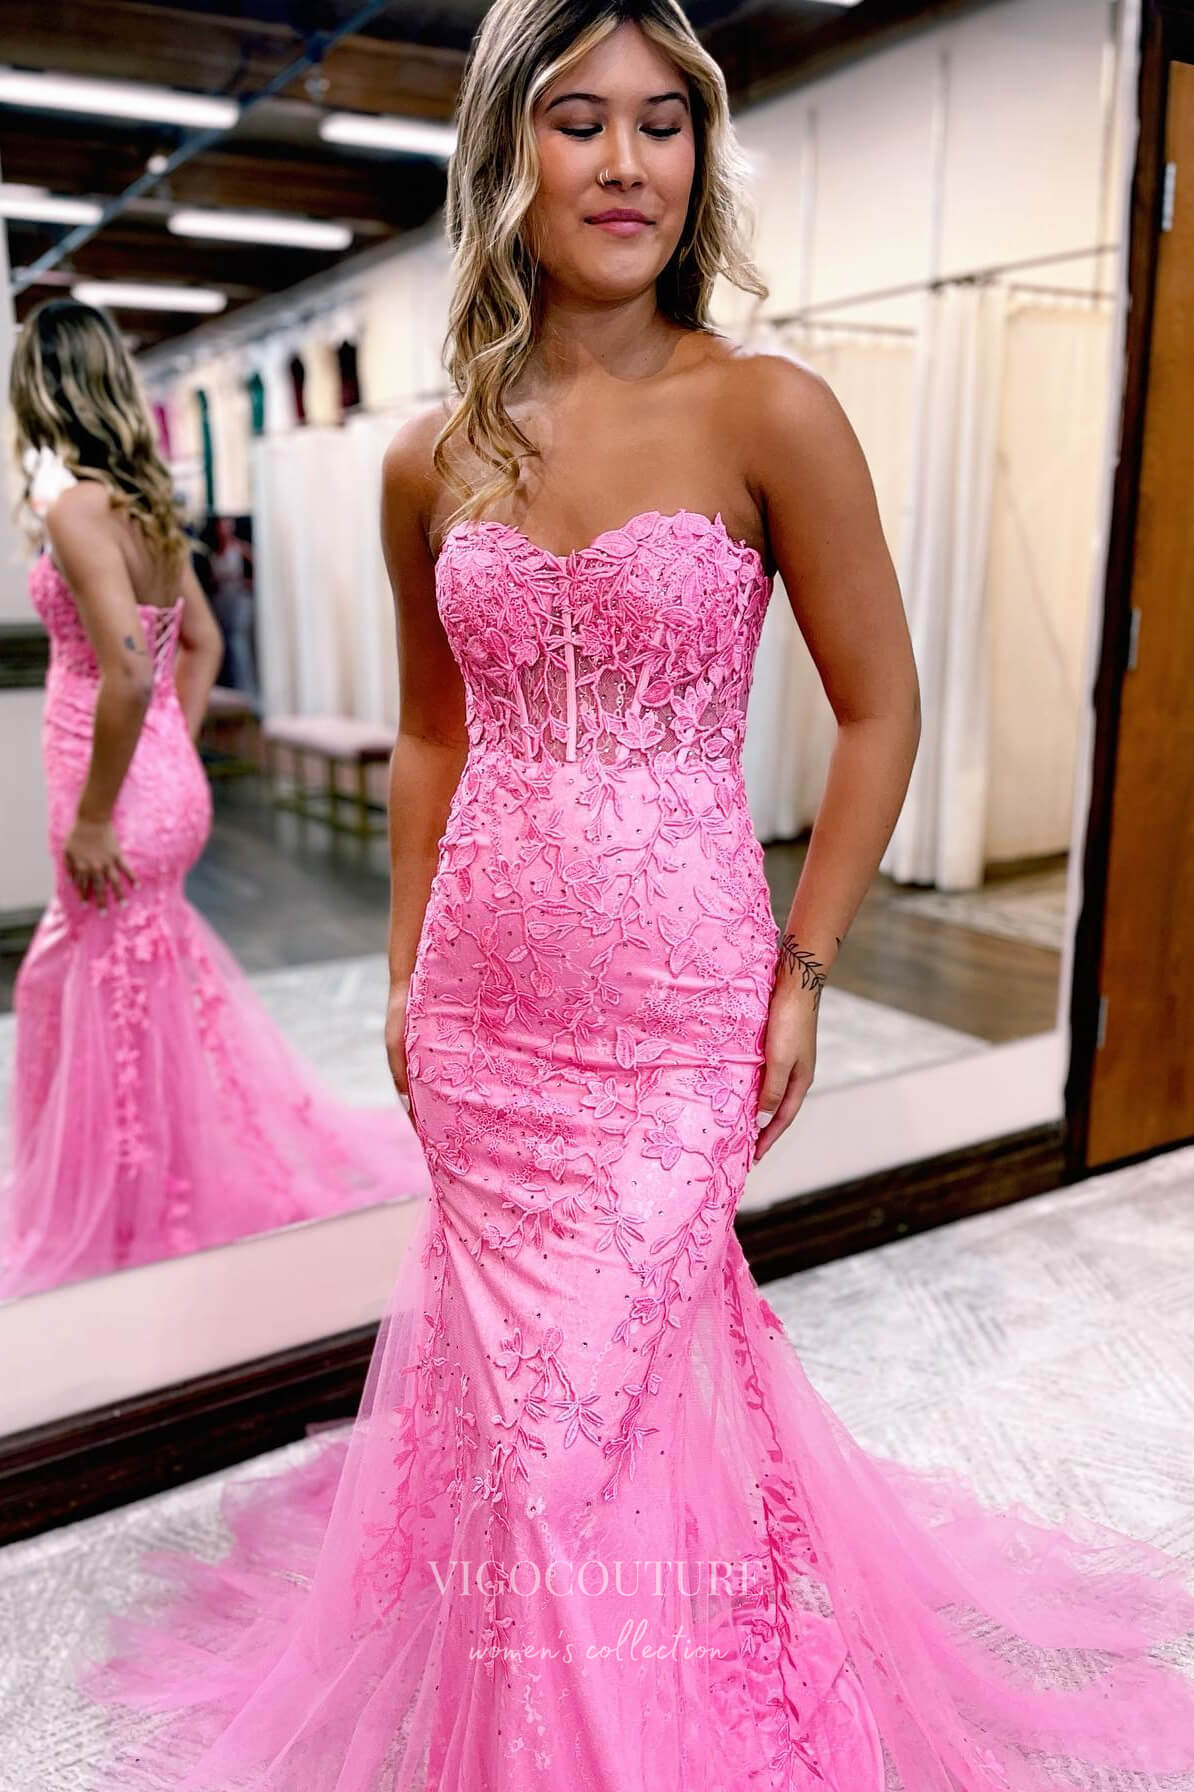 Strapless Lace Applique Prom Dresses with Corset Back Mermaid Evening Dress  22167 - Pink / Custom Size